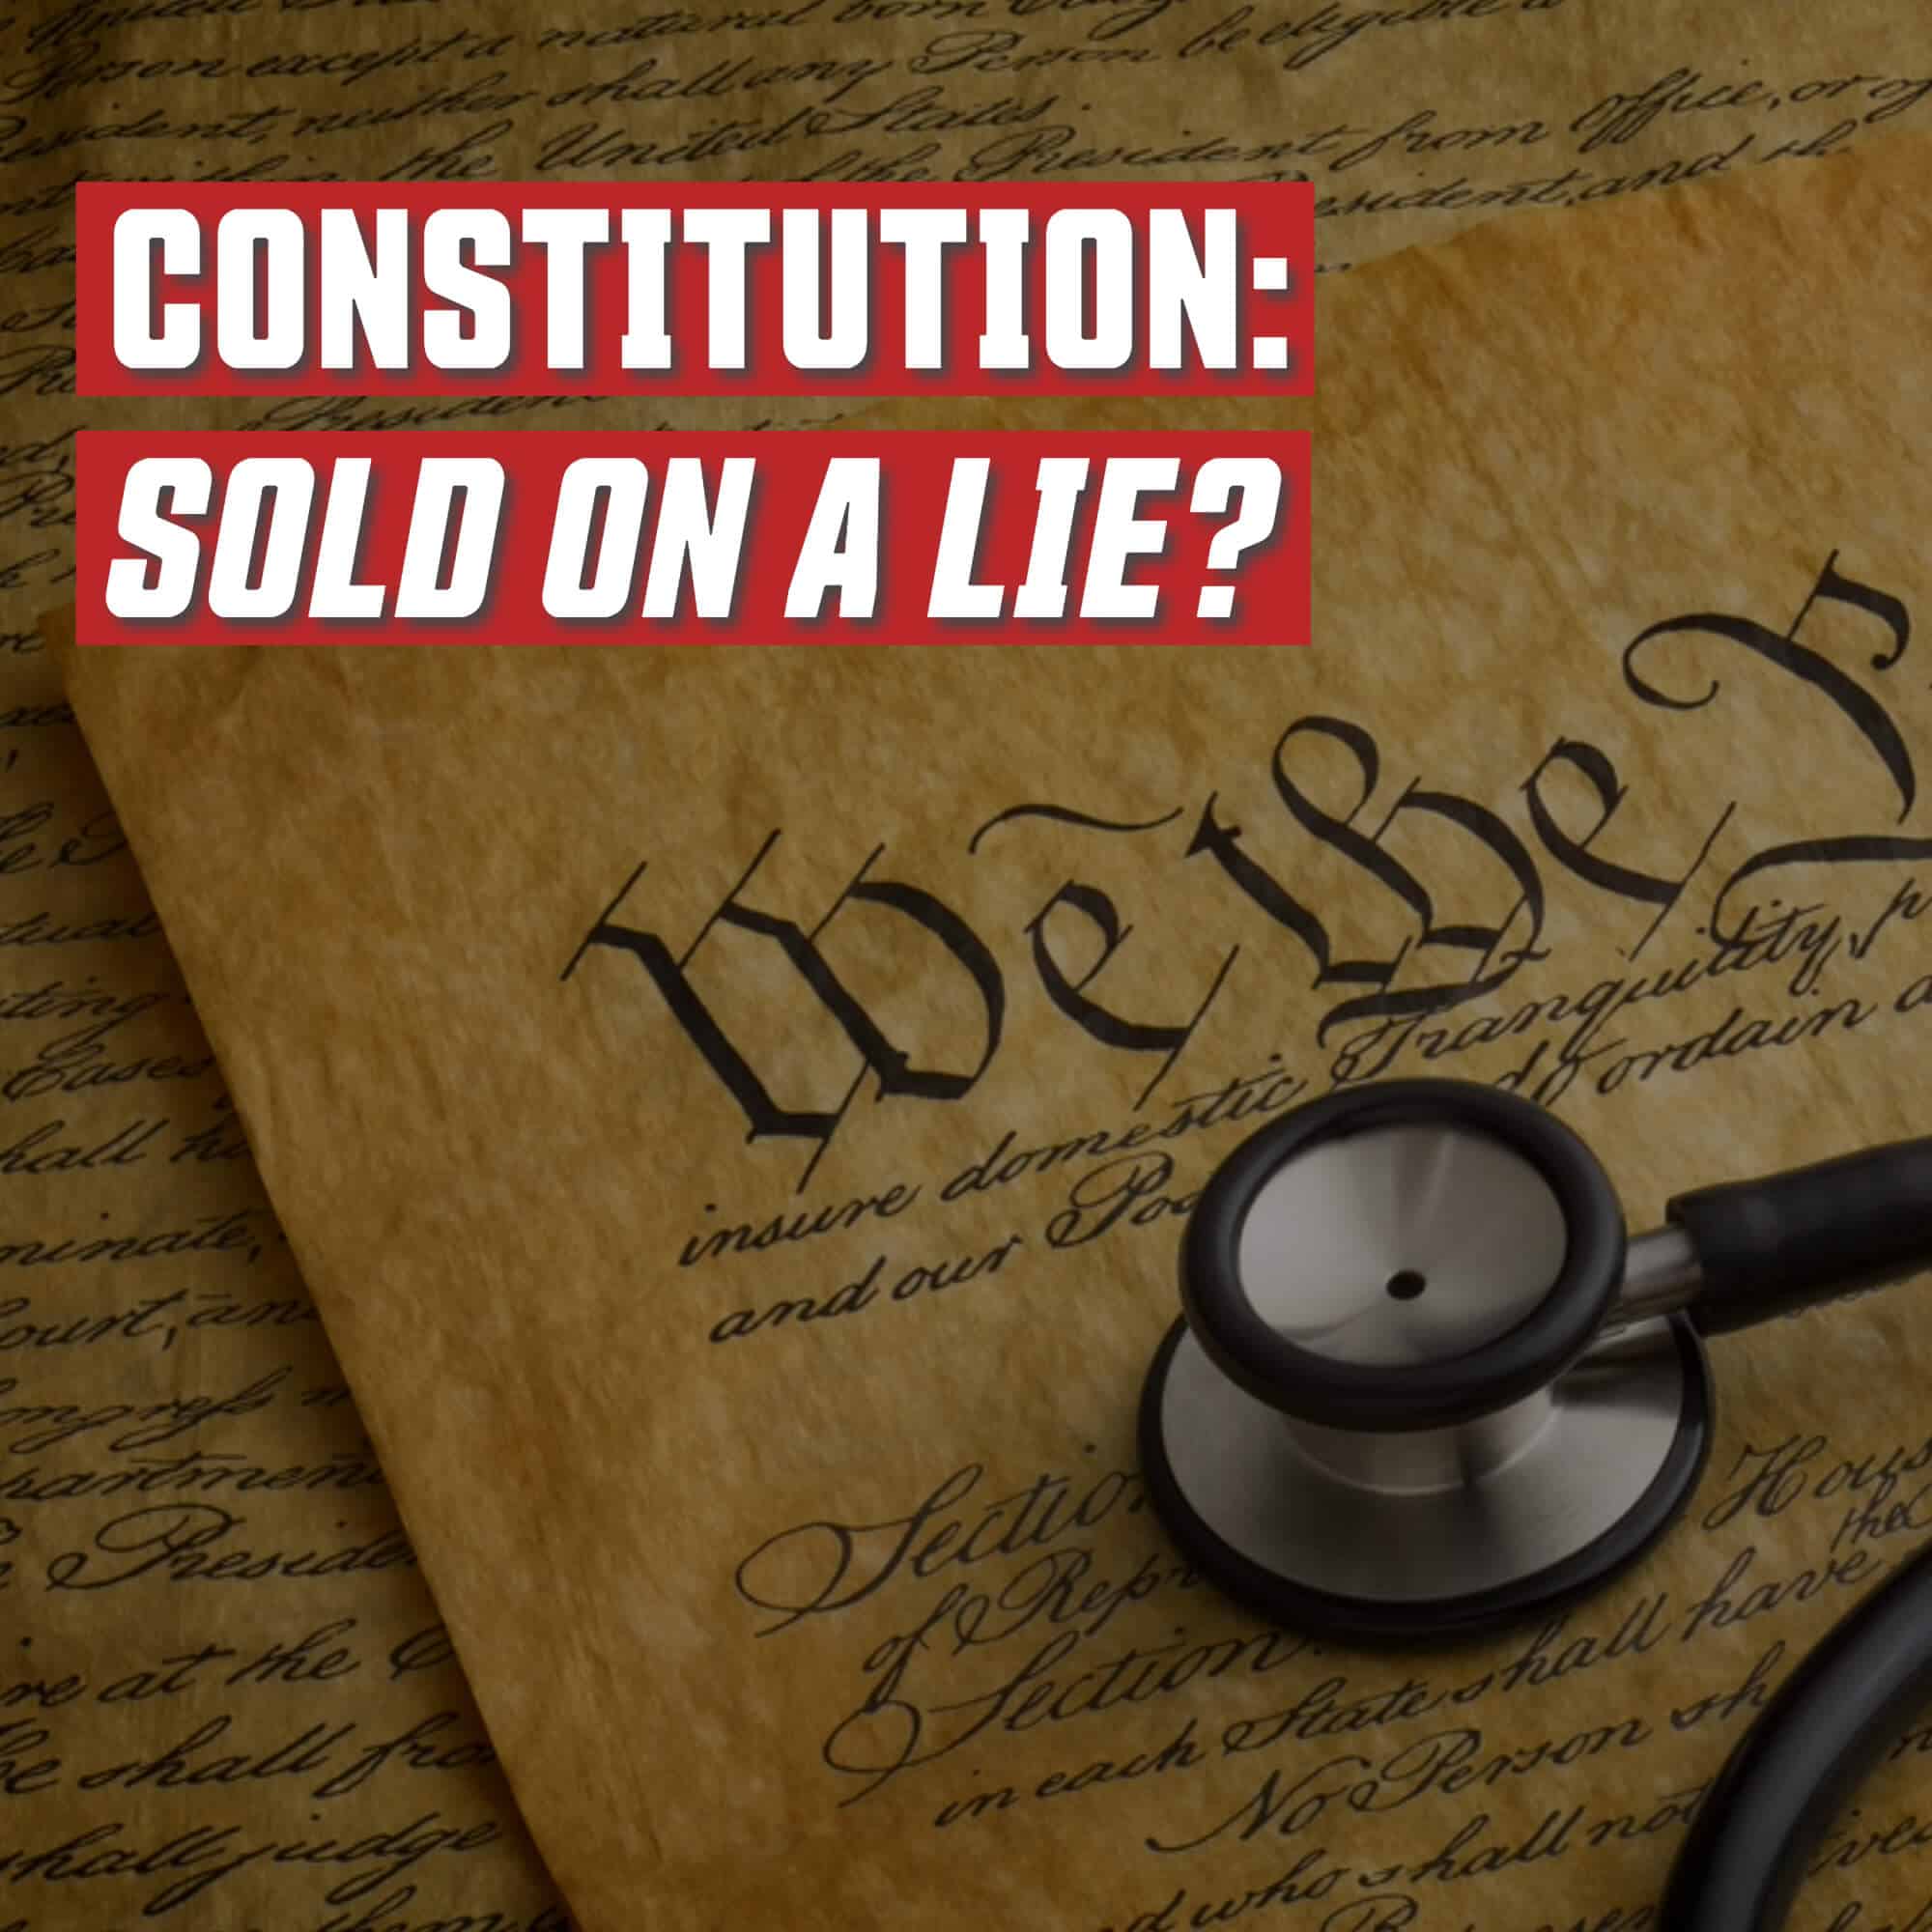 Was the Constitution Sold on a Lie? Shays’ Rebellion and Ratification